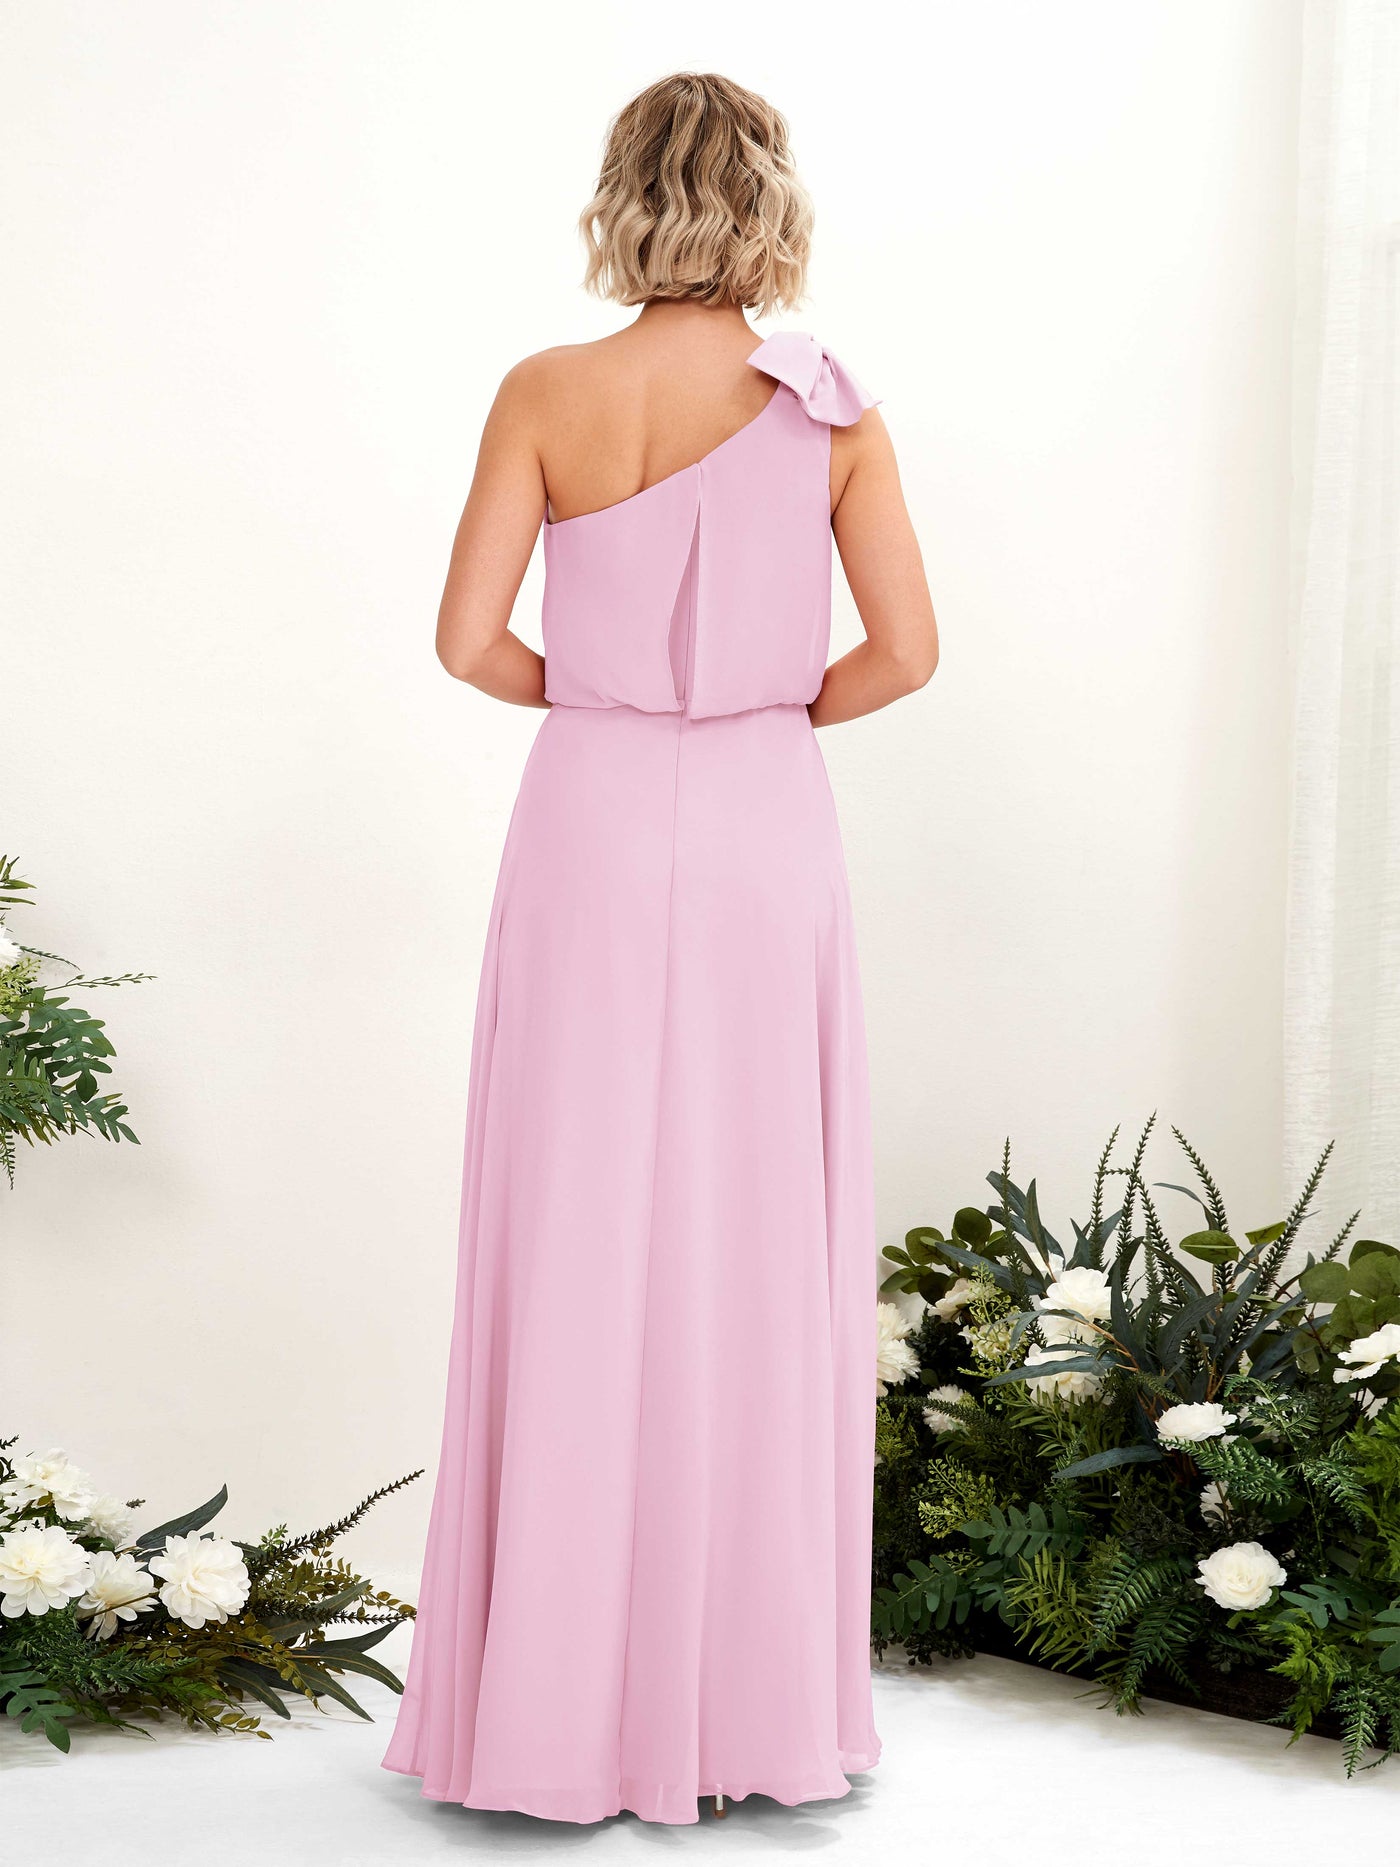 Candy Pink Bridesmaid Dresses Bridesmaid Dress A-line Chiffon One Shoulder Full Length Sleeveless Wedding Party Dress (81225539)#color_candy-pink